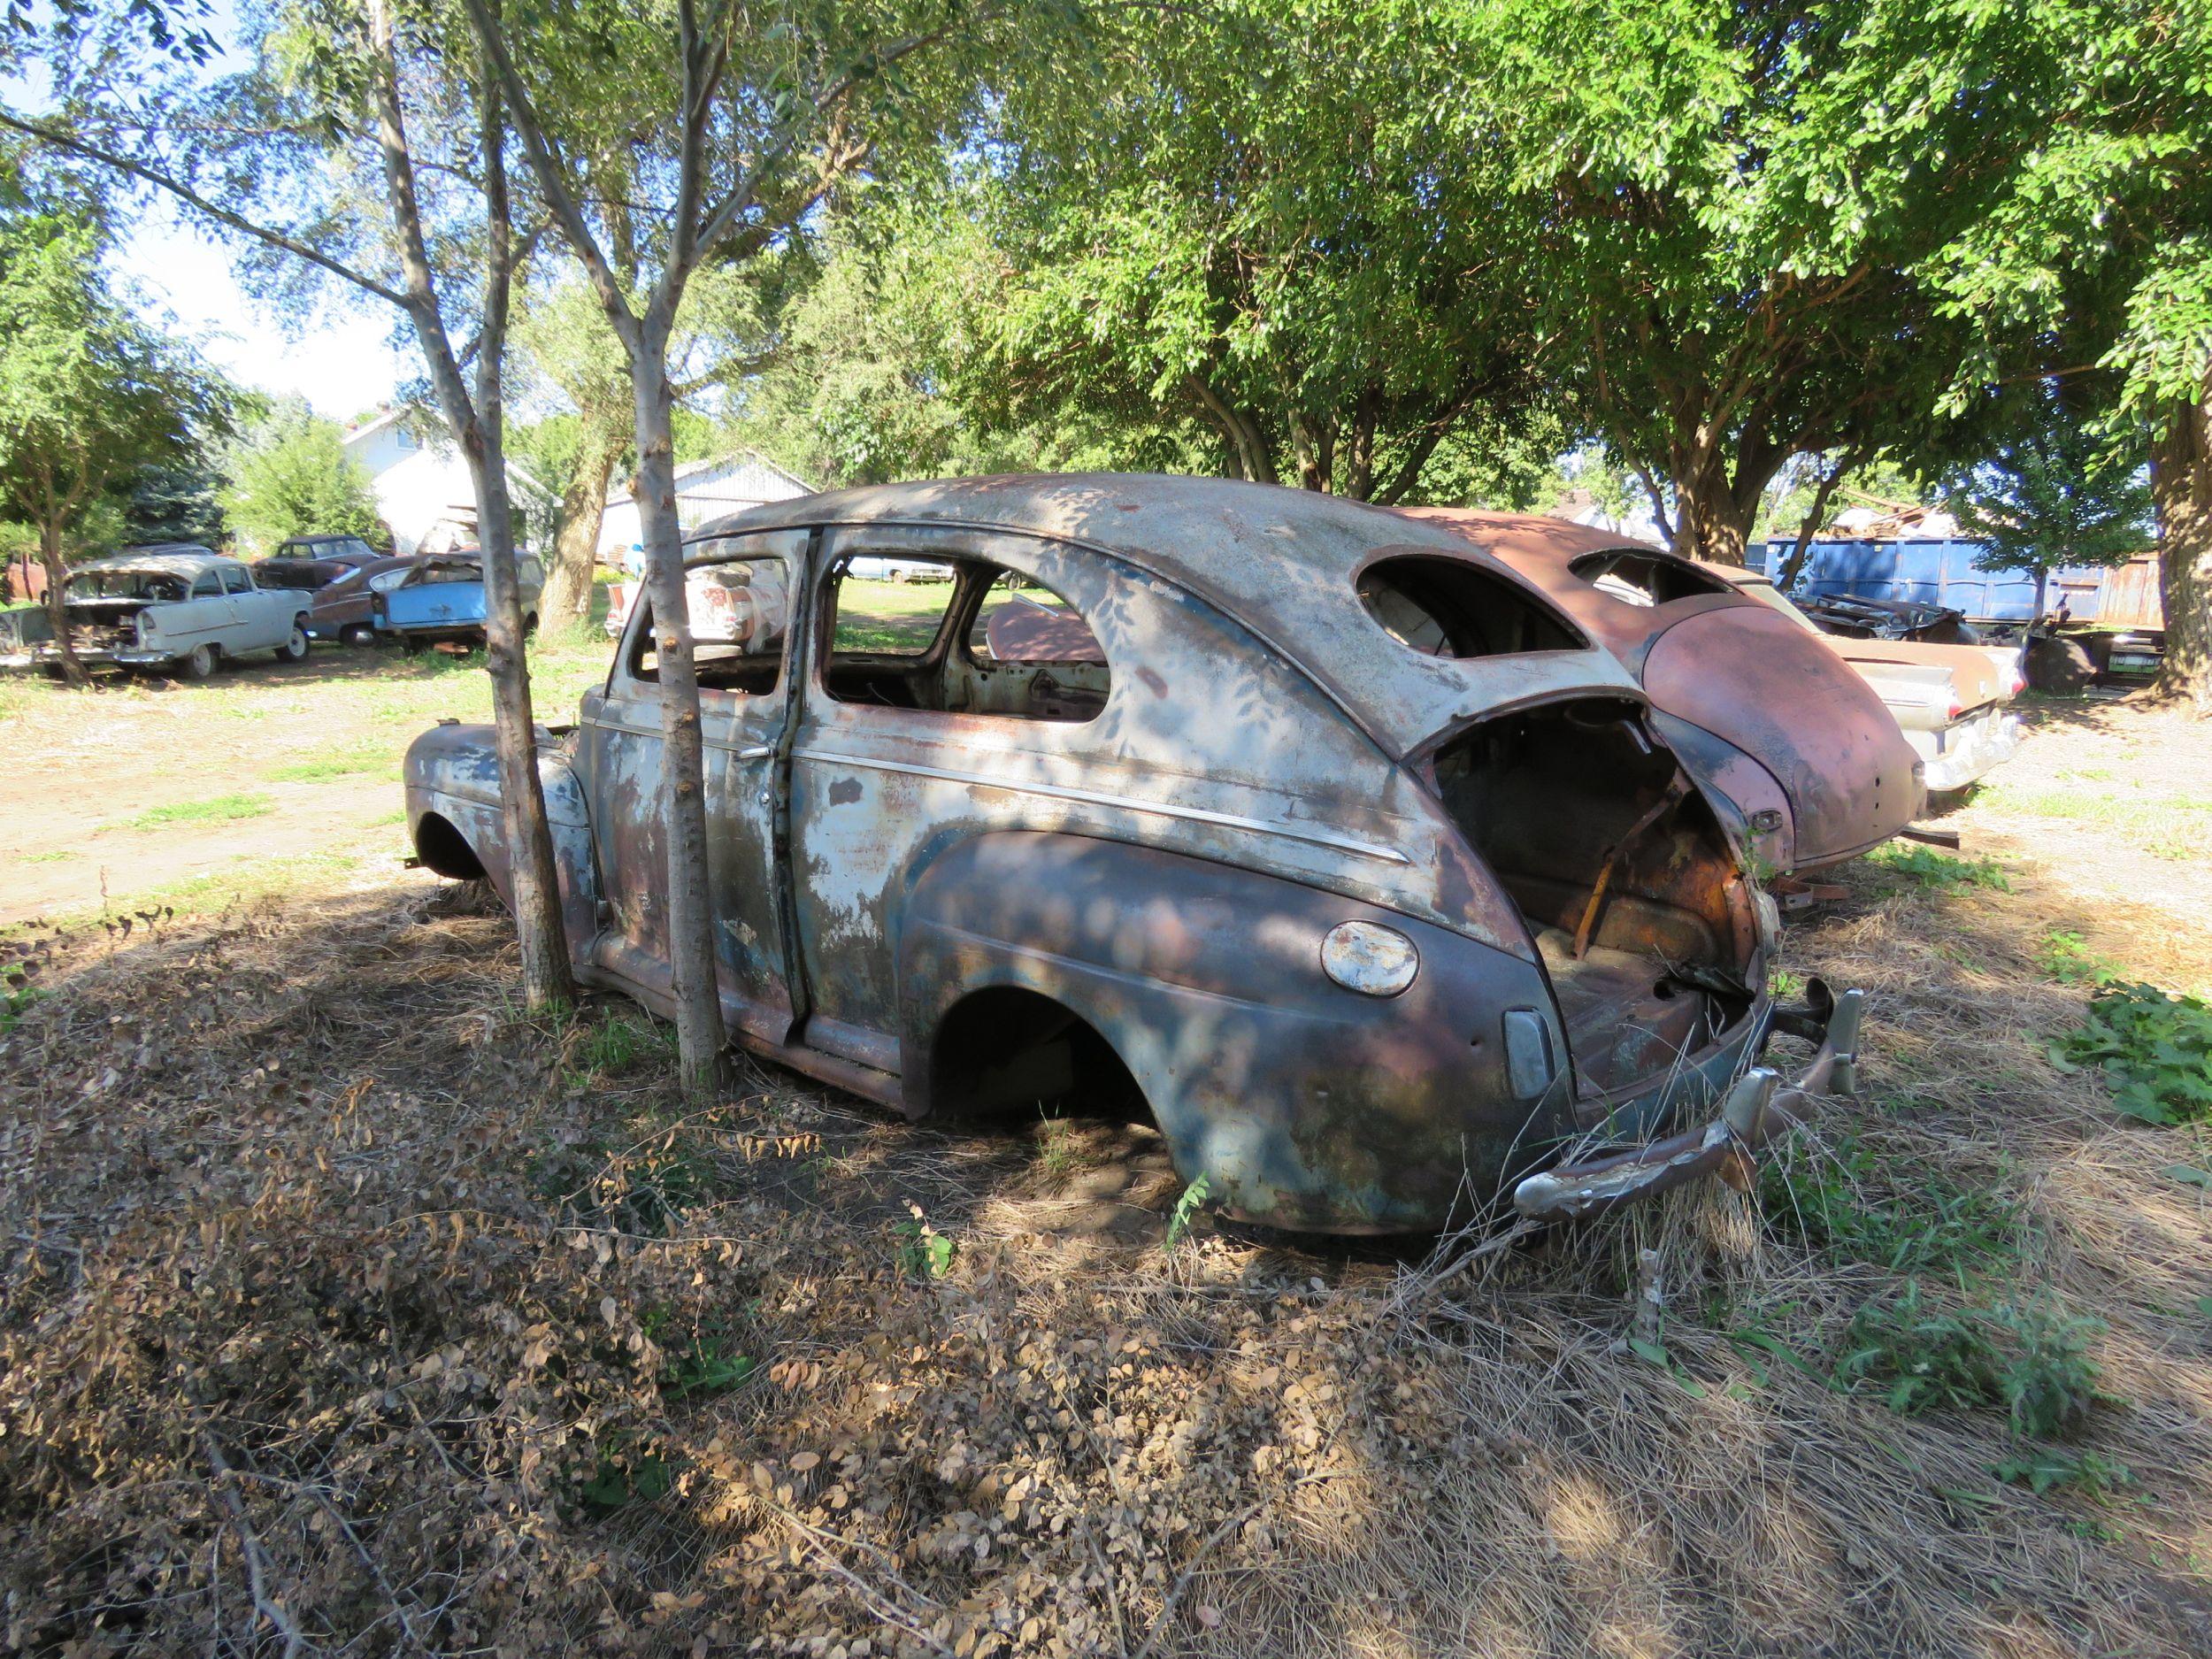 1941 Ford 2dr Sedan Body for Project or Parts